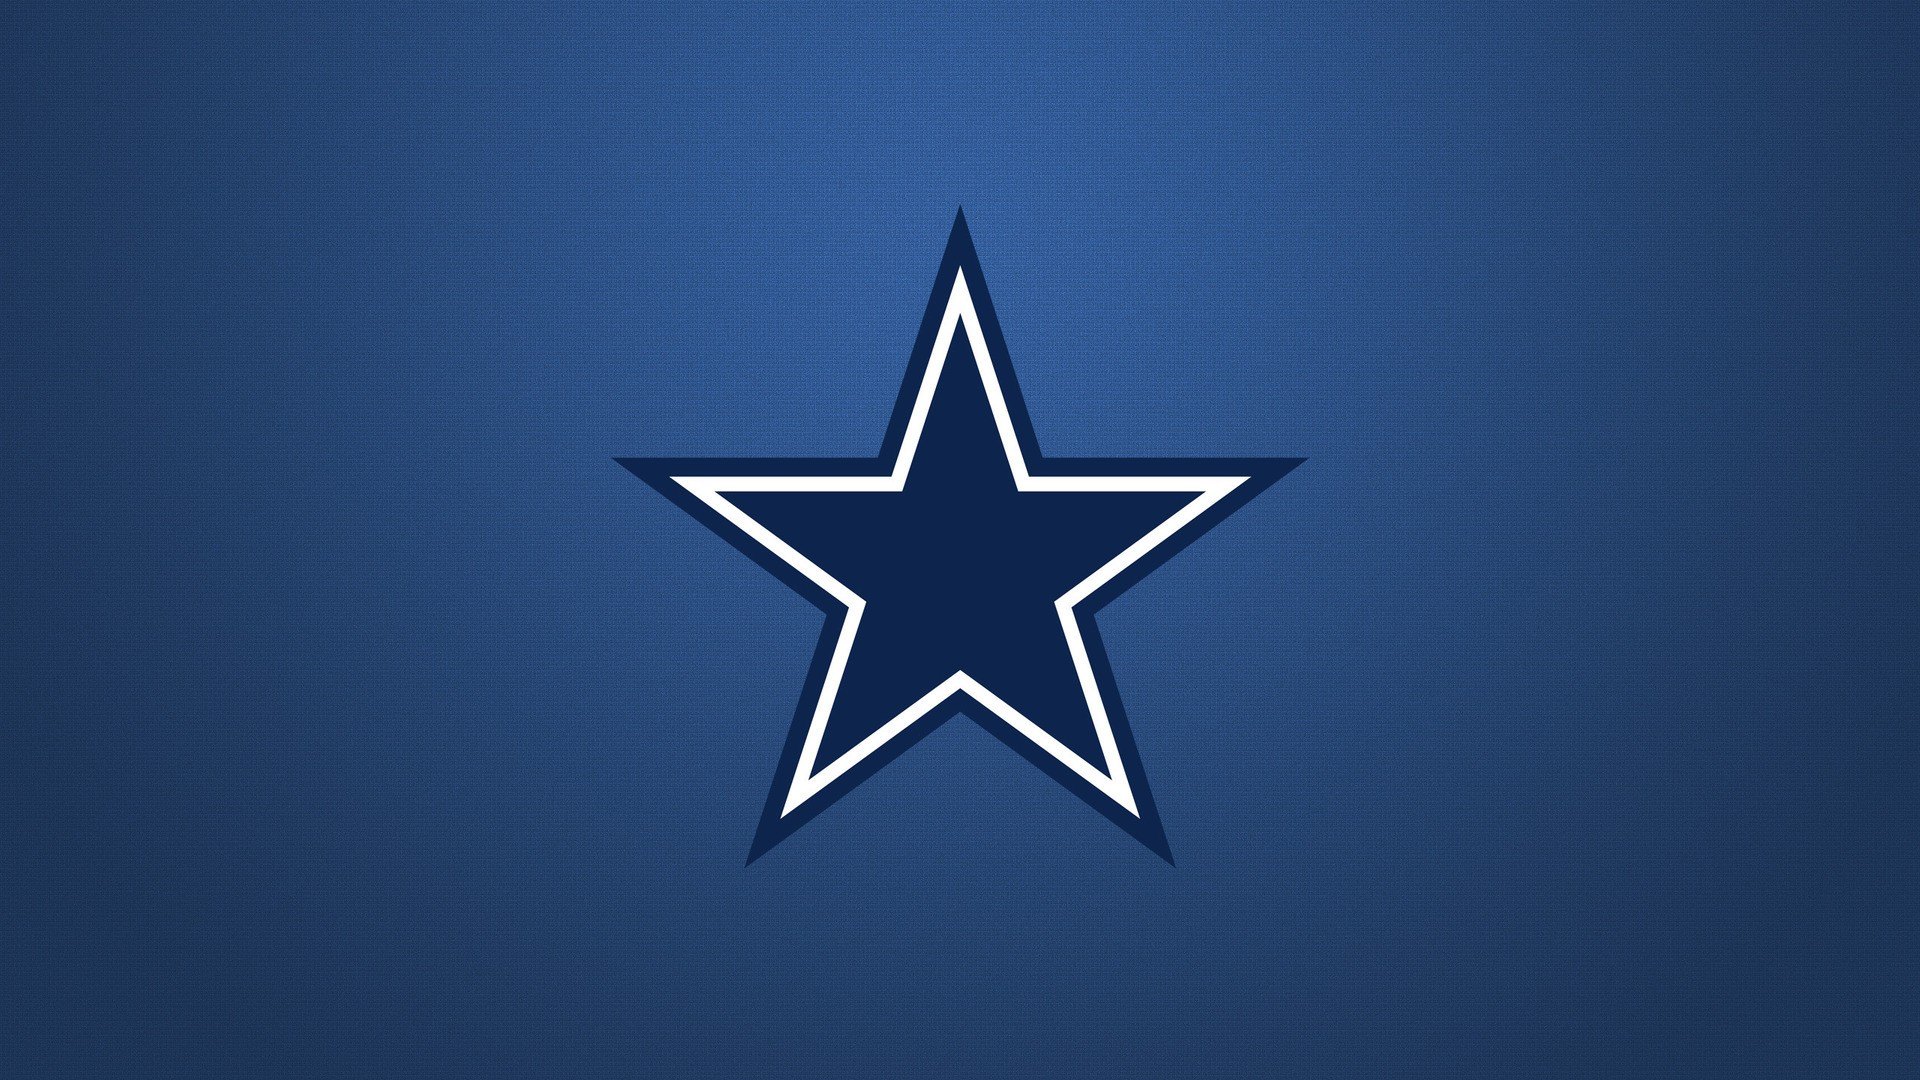 Our Wallpaper Of The Week Dallas Cowboys